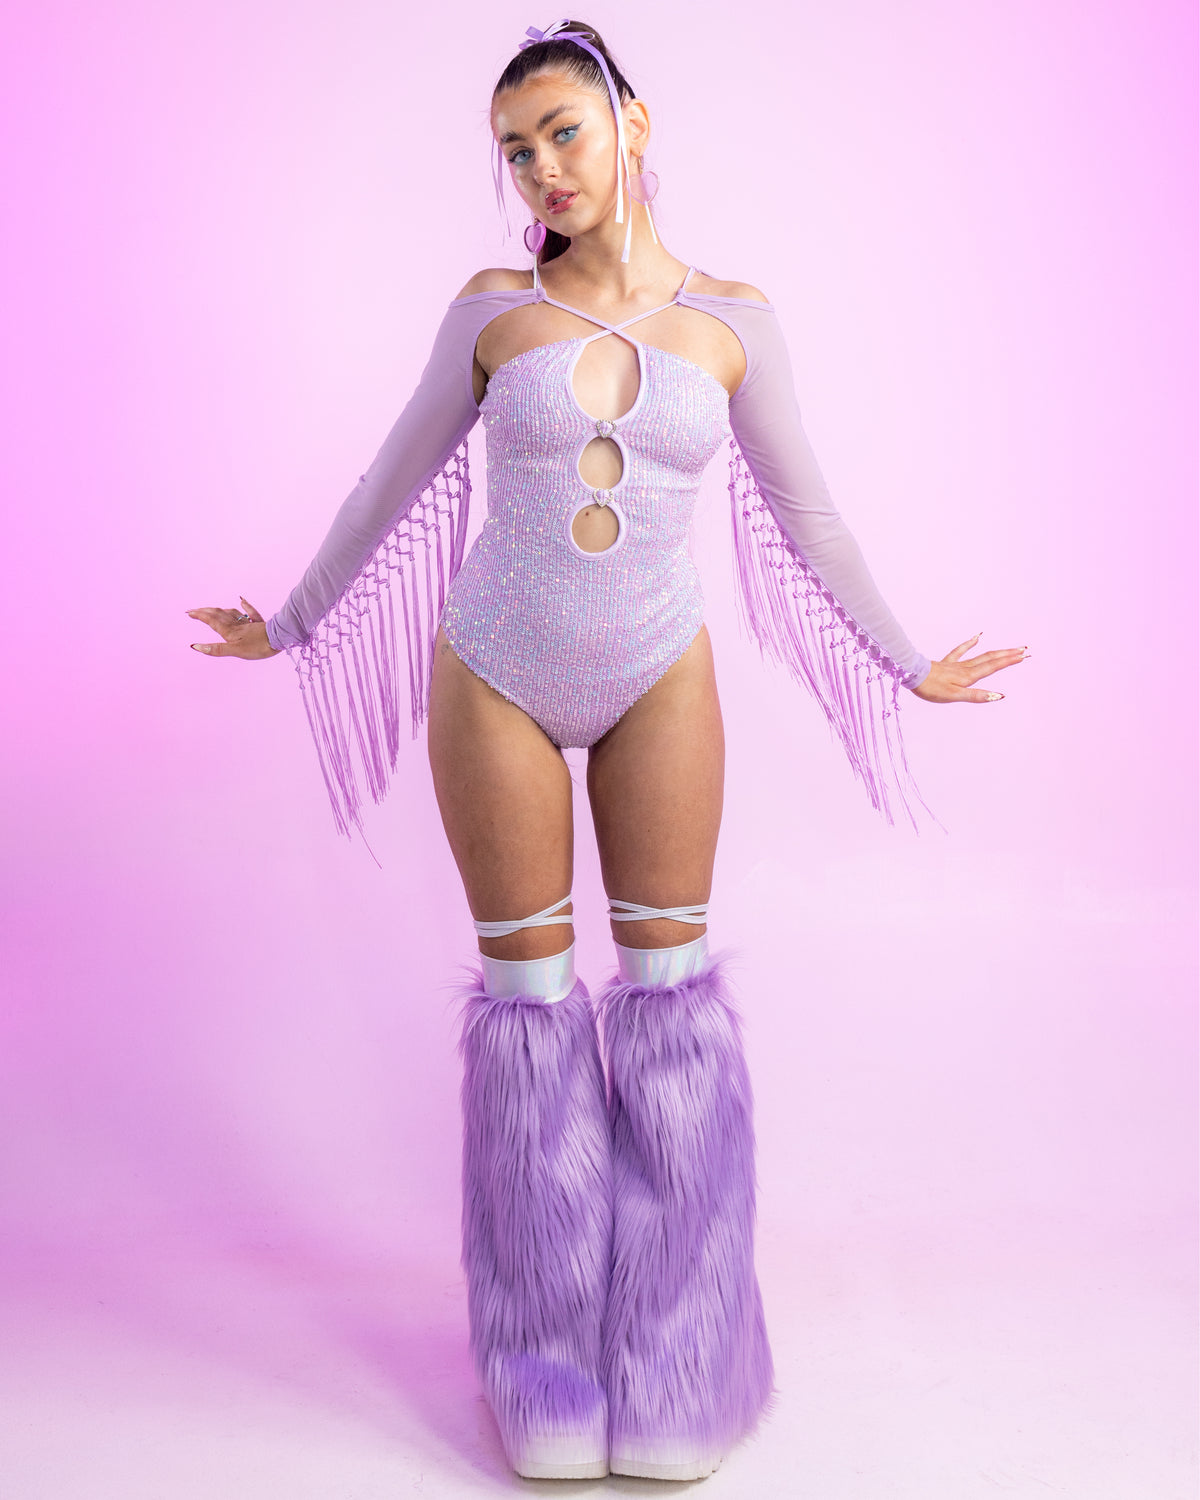 FULL OUTFIT - Bubblegum Rave clothes,rave outfits,edc outfits,rave